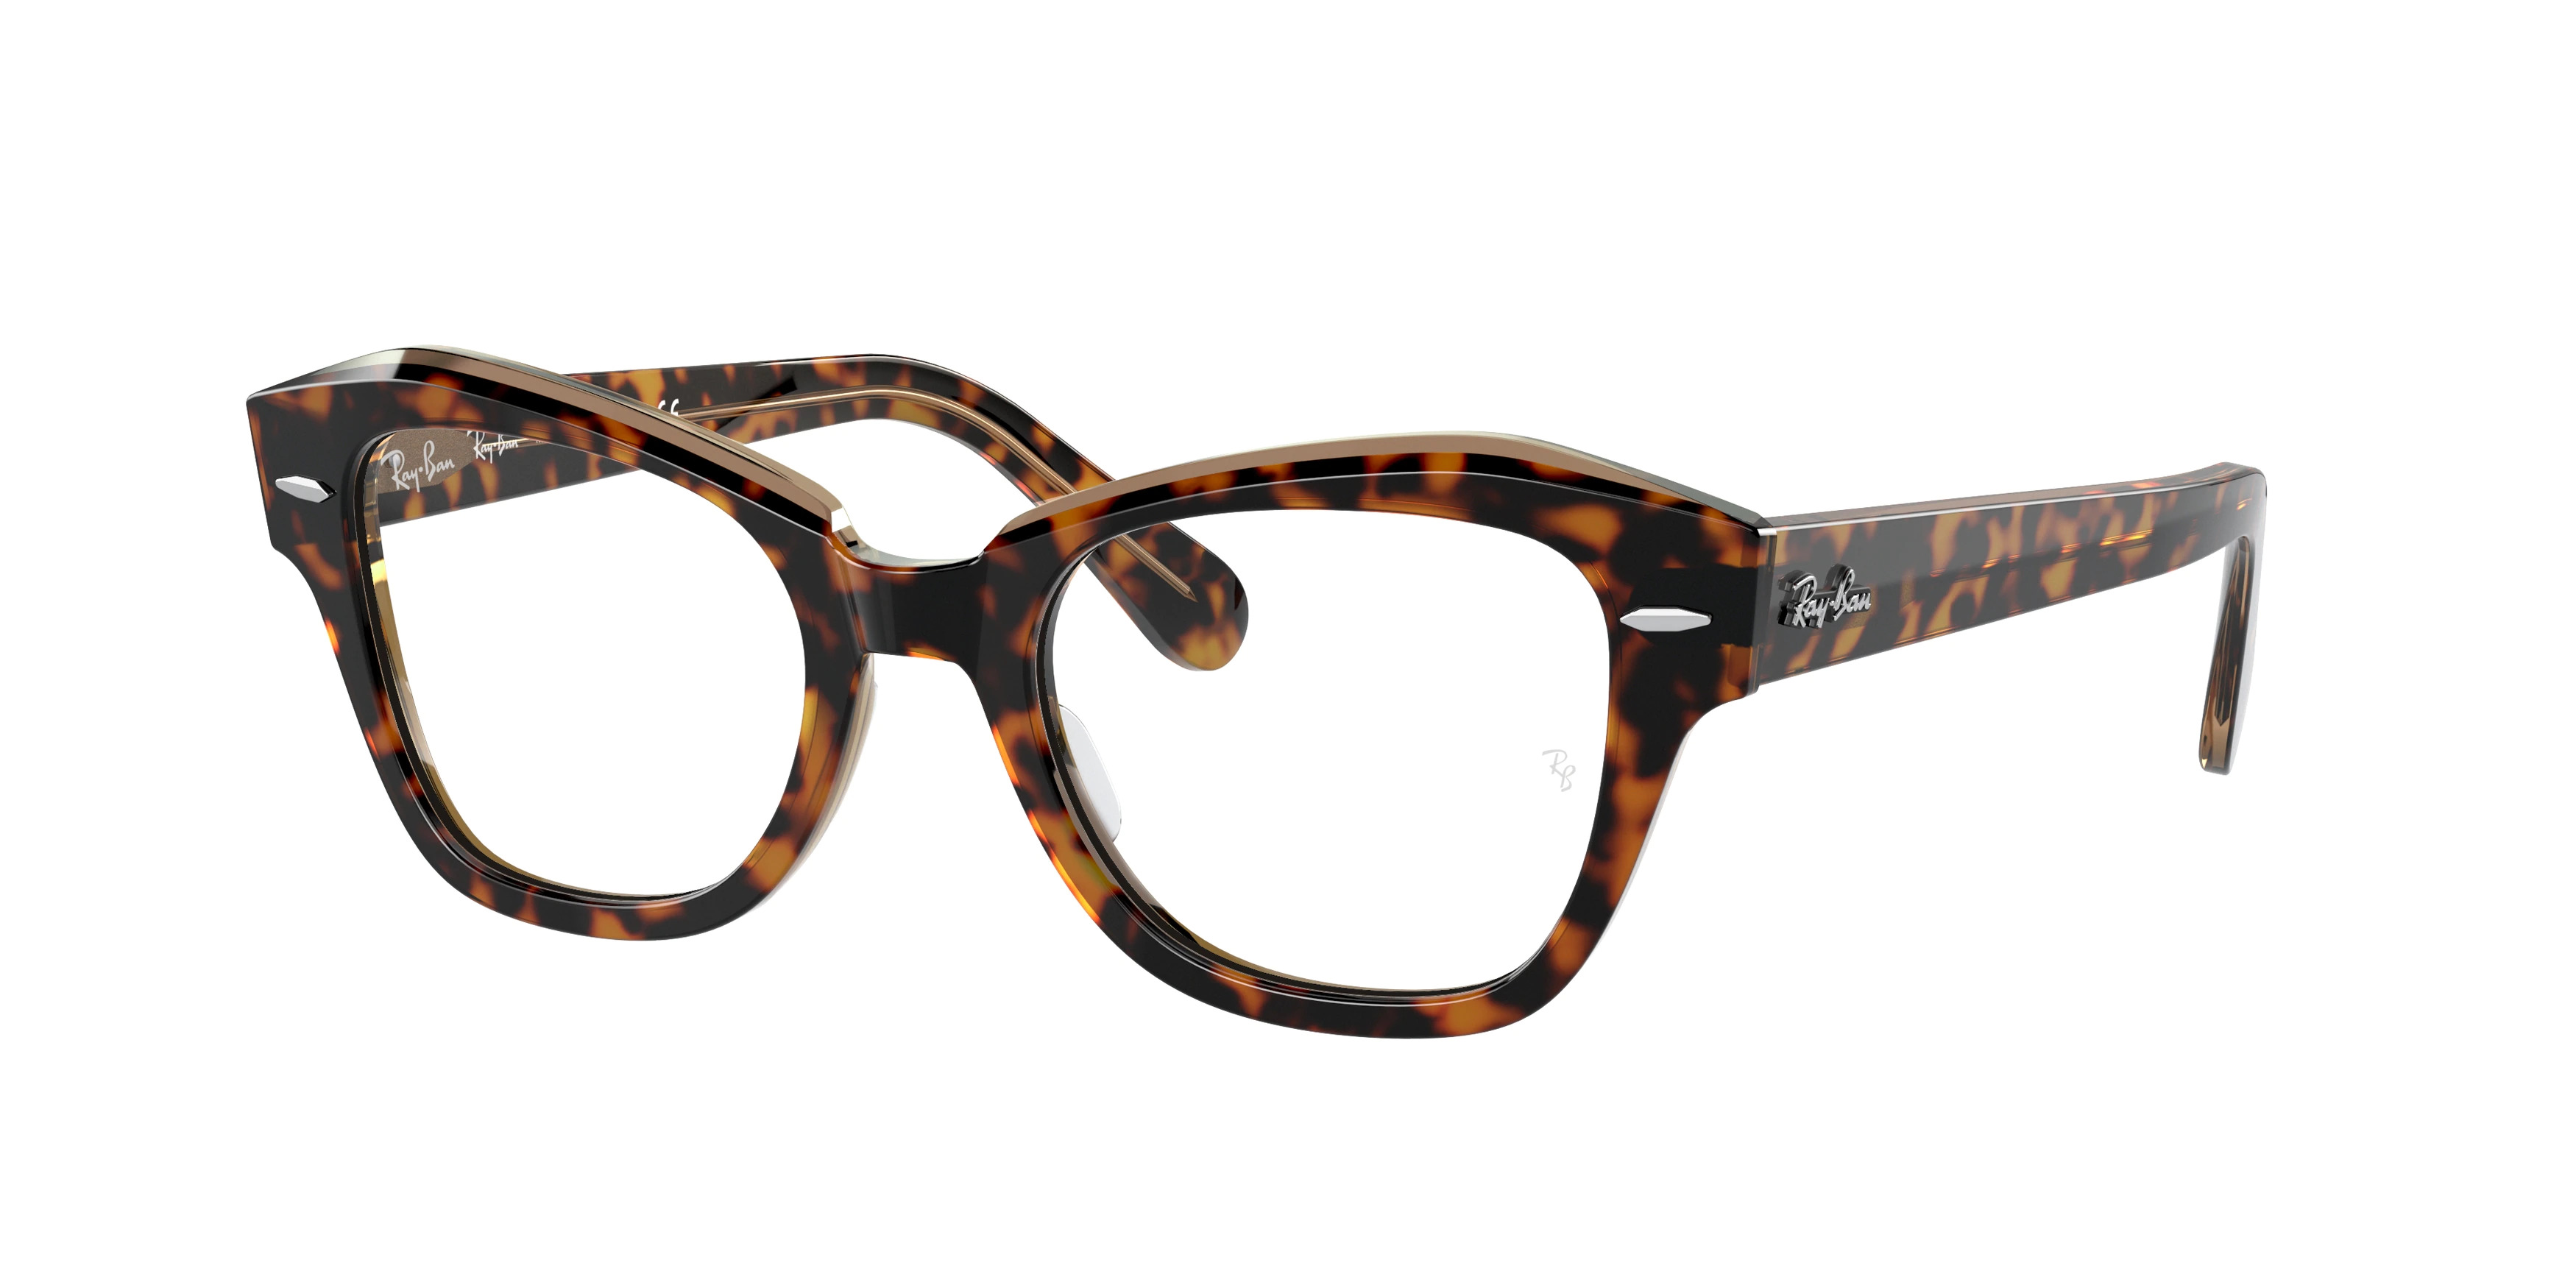 Ray-ban State Street RX5486 5989 Brown Tortoise